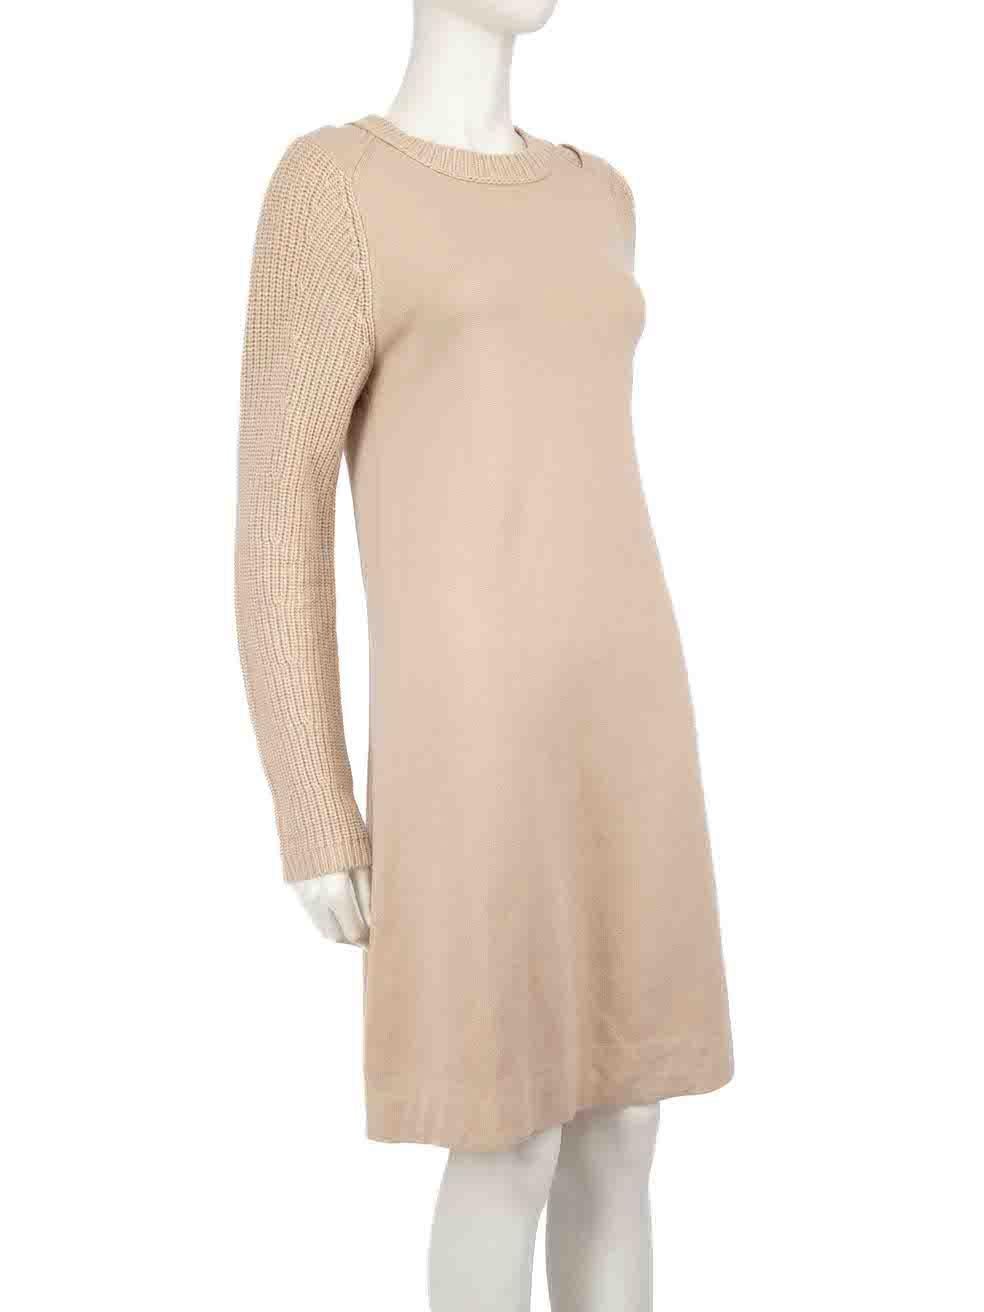 CONDITION is Very good. Minimal wear to dress is evident. Minimal pilling to both sleeves on this used Chloé designer resale item.
 
 
 
 Details
 
 
 Rope beige
 
 Wool
 
 Knit dress
 
 Knee length
 
 Chunky knit long sleeves
 
 Round neck
 
